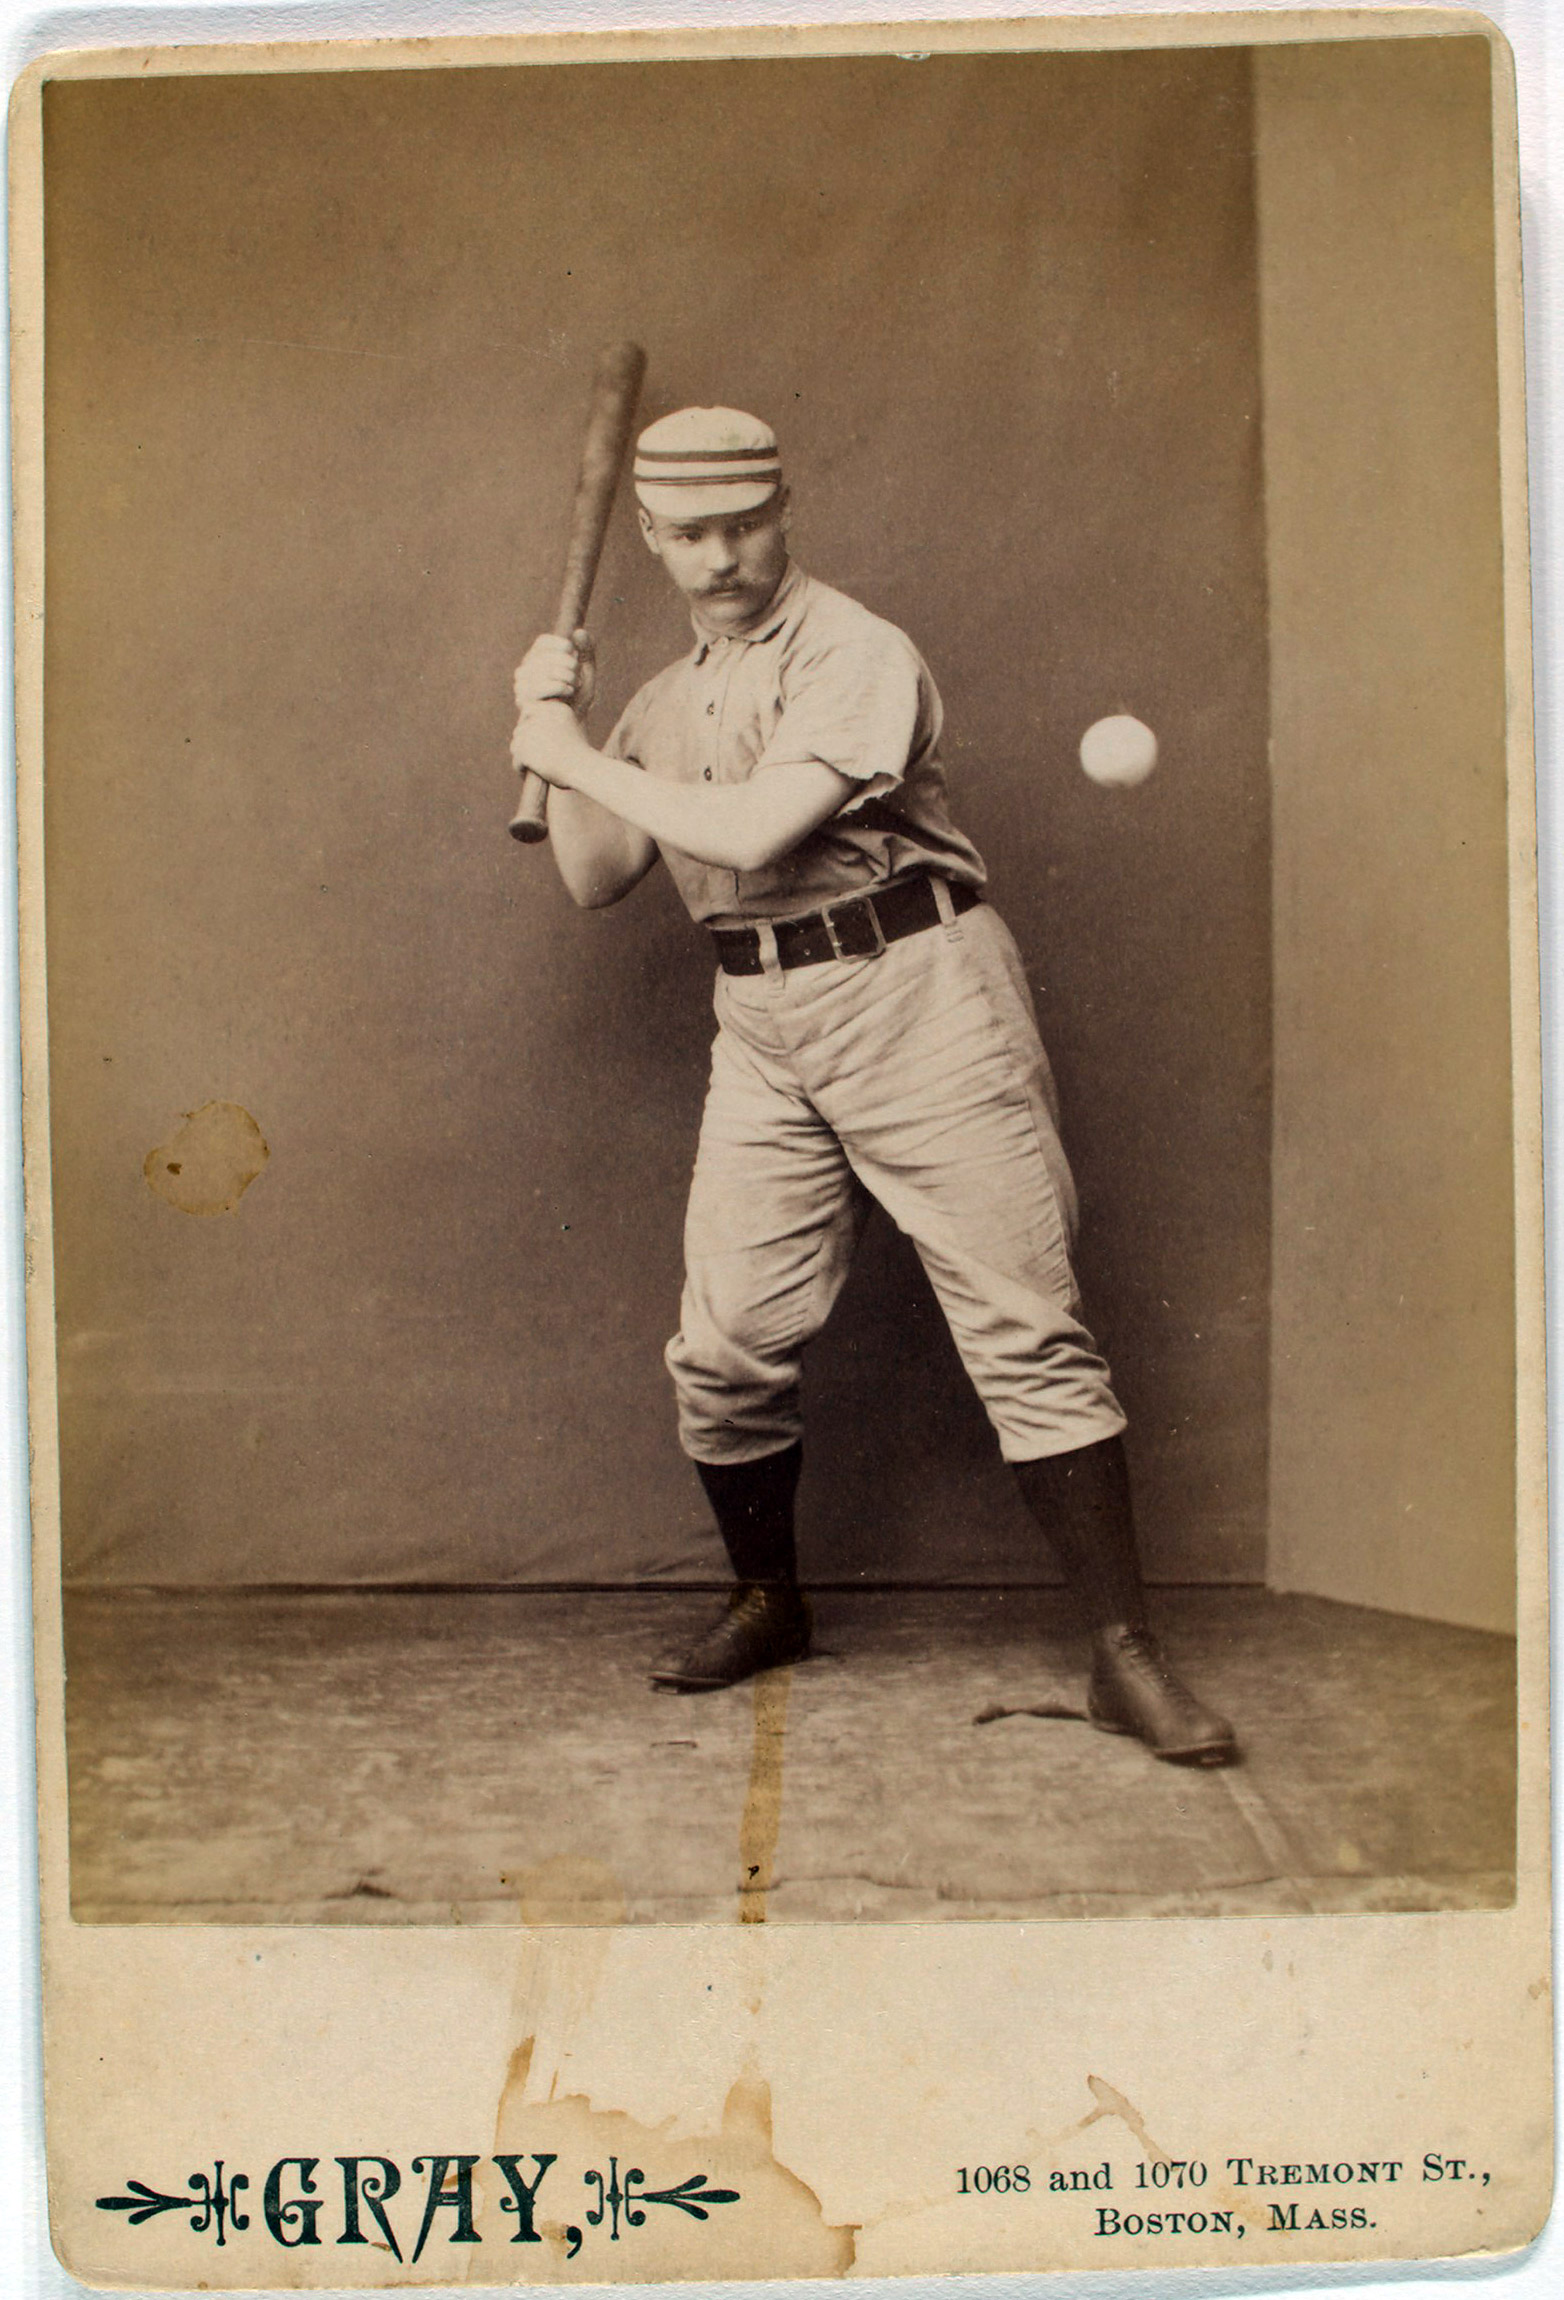 Deacon McGuire of the Philadelphia Quakers. From the A. G. Spalding Baseball Collection.